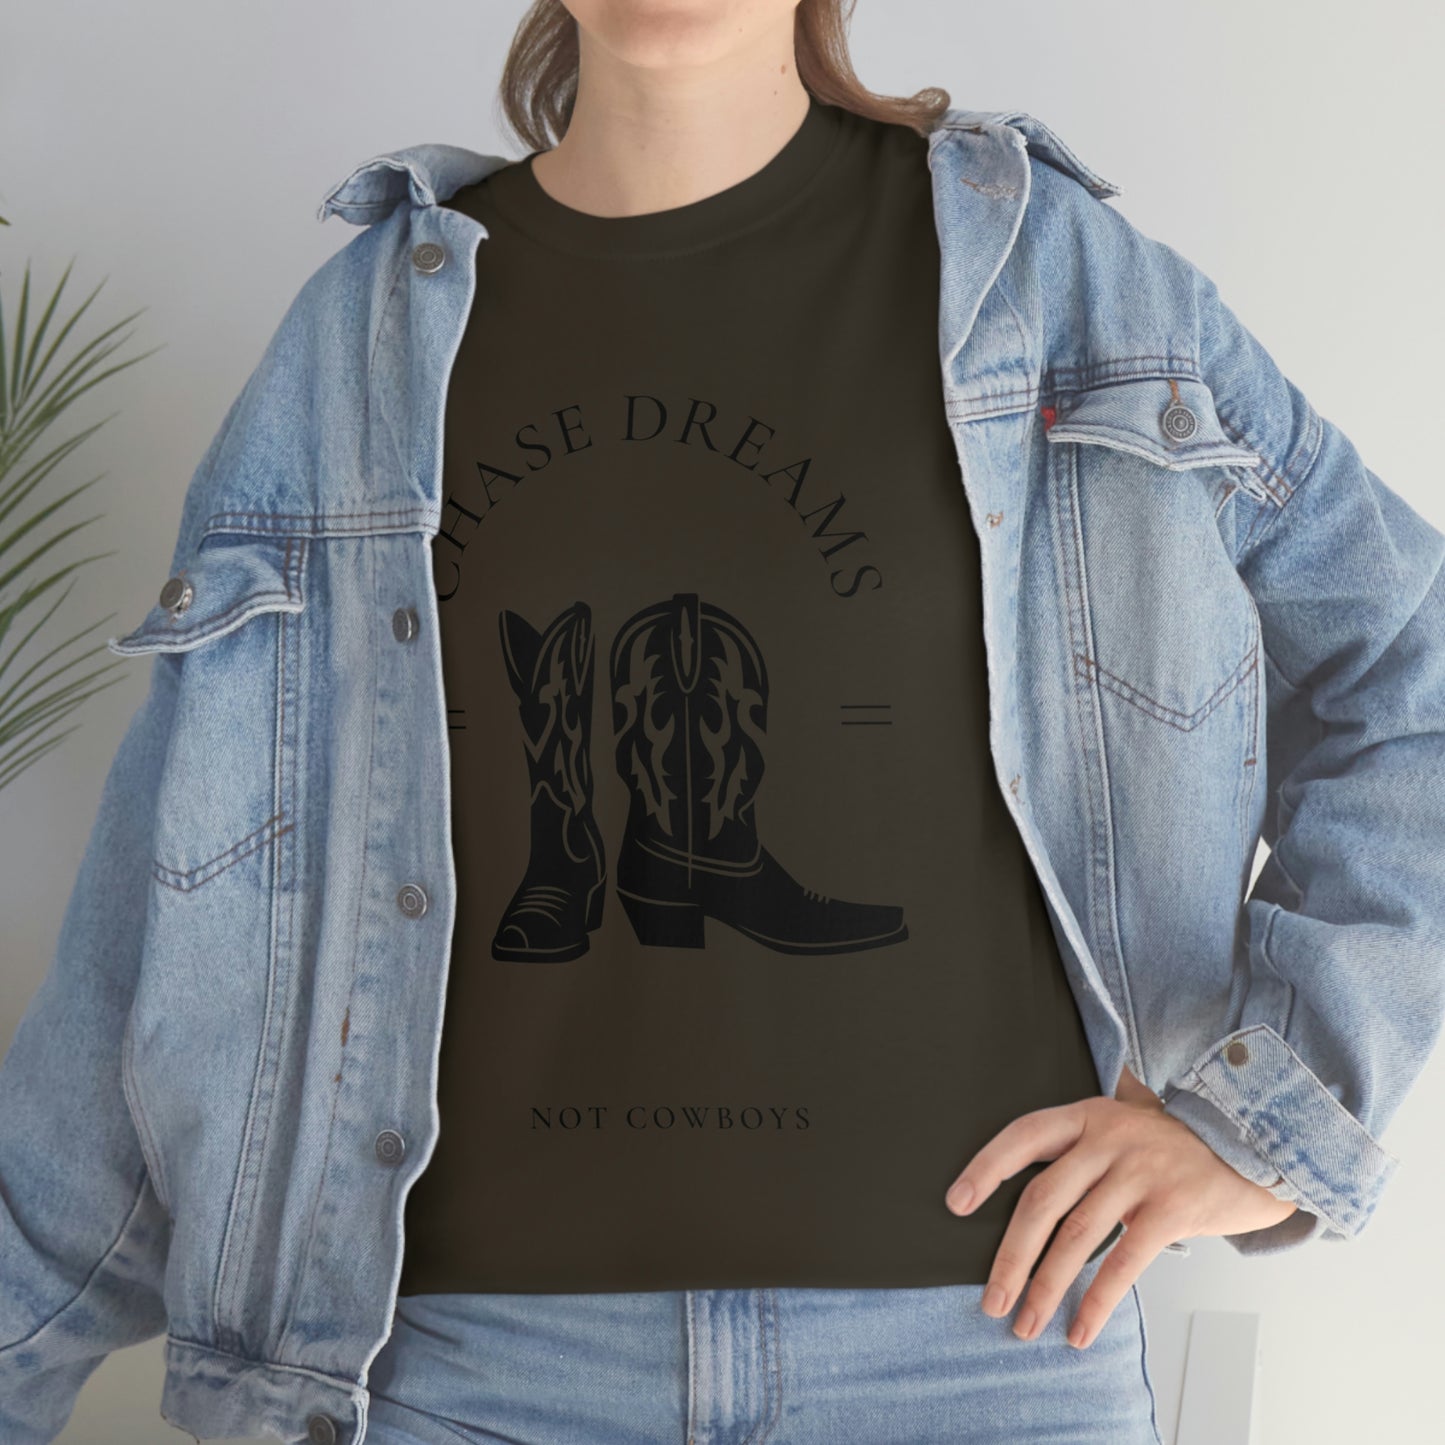 Chase Dreams and Boots Graphic Tee